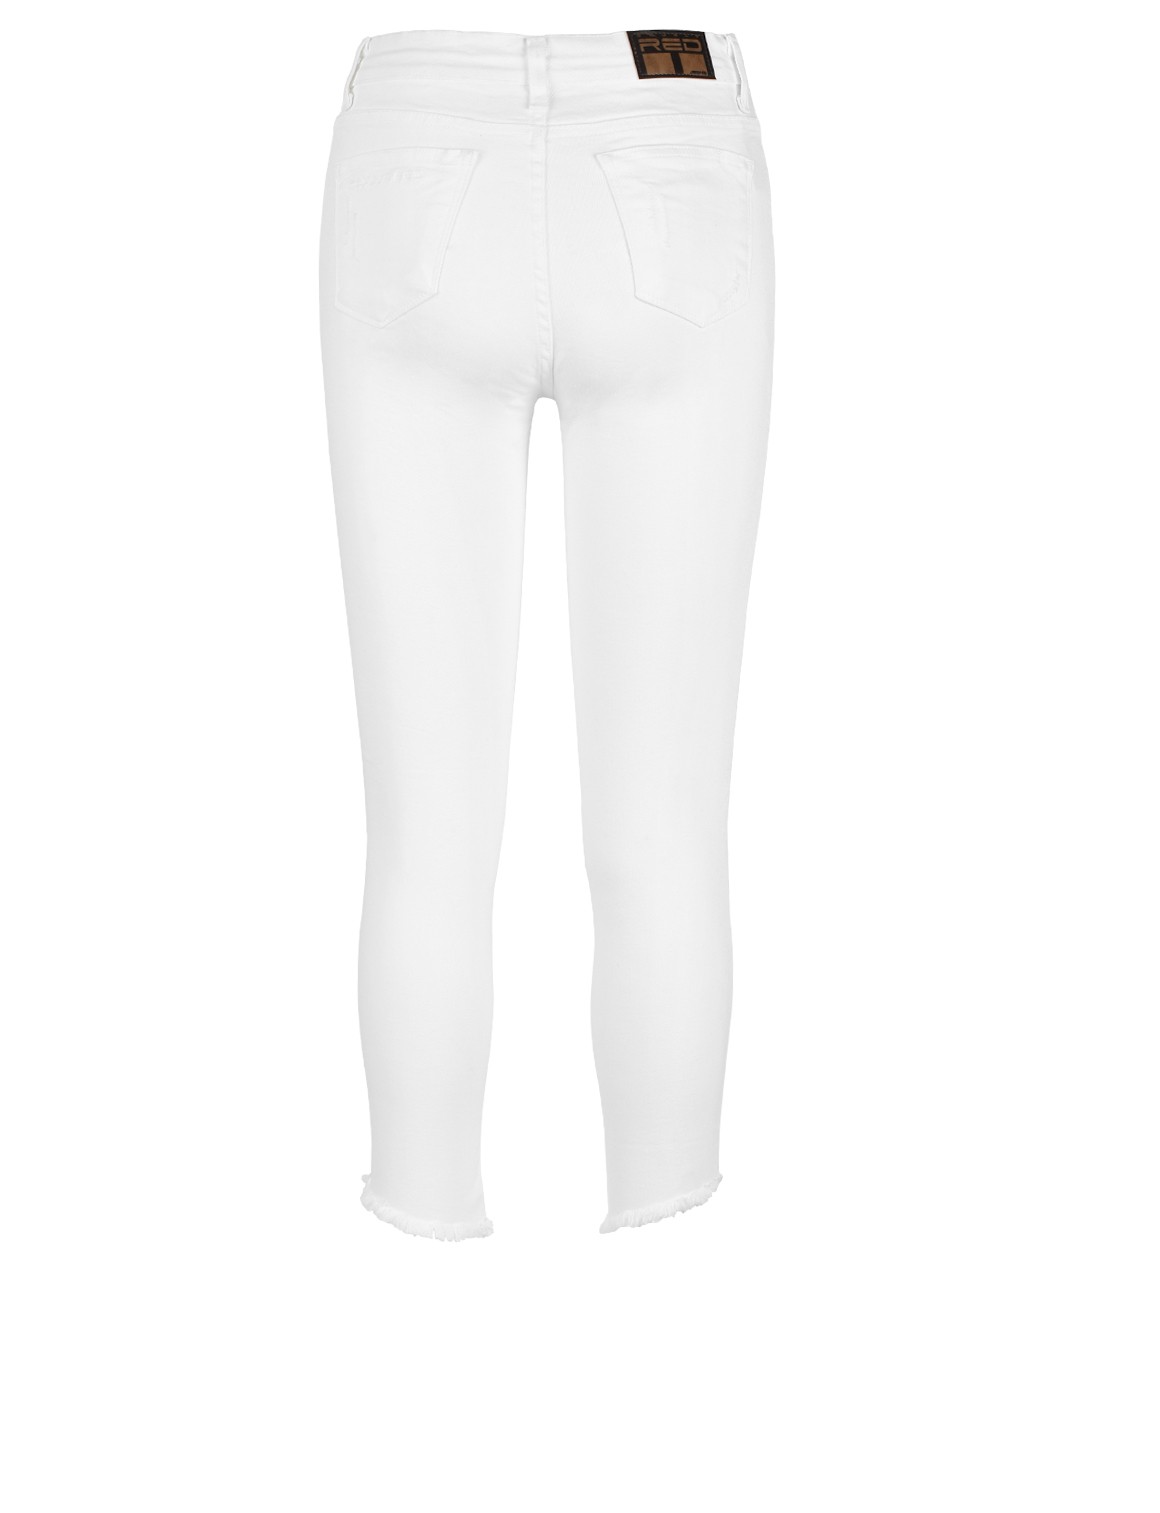 STRIPES Jeans Collection White